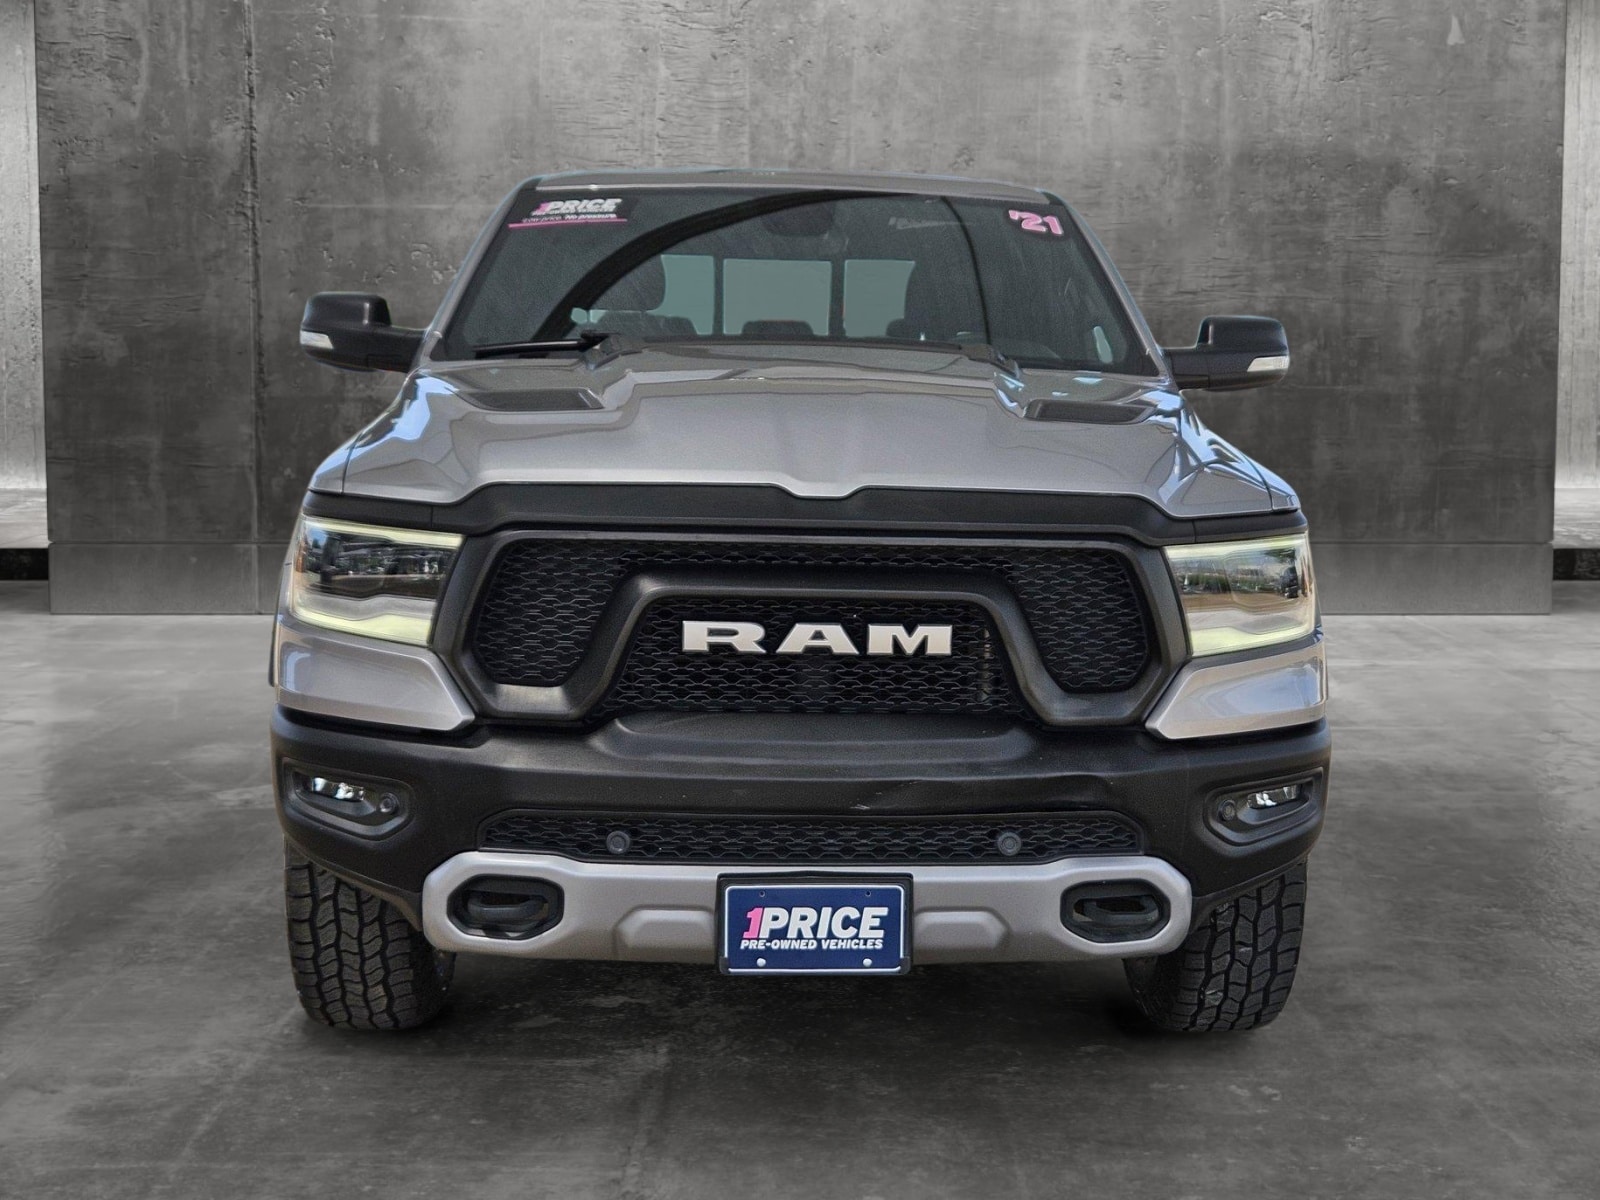 Used 2019 RAM Ram 1500 Pickup Rebel with VIN 1C6SRFLTXKN799712 for sale in Fort Worth, TX